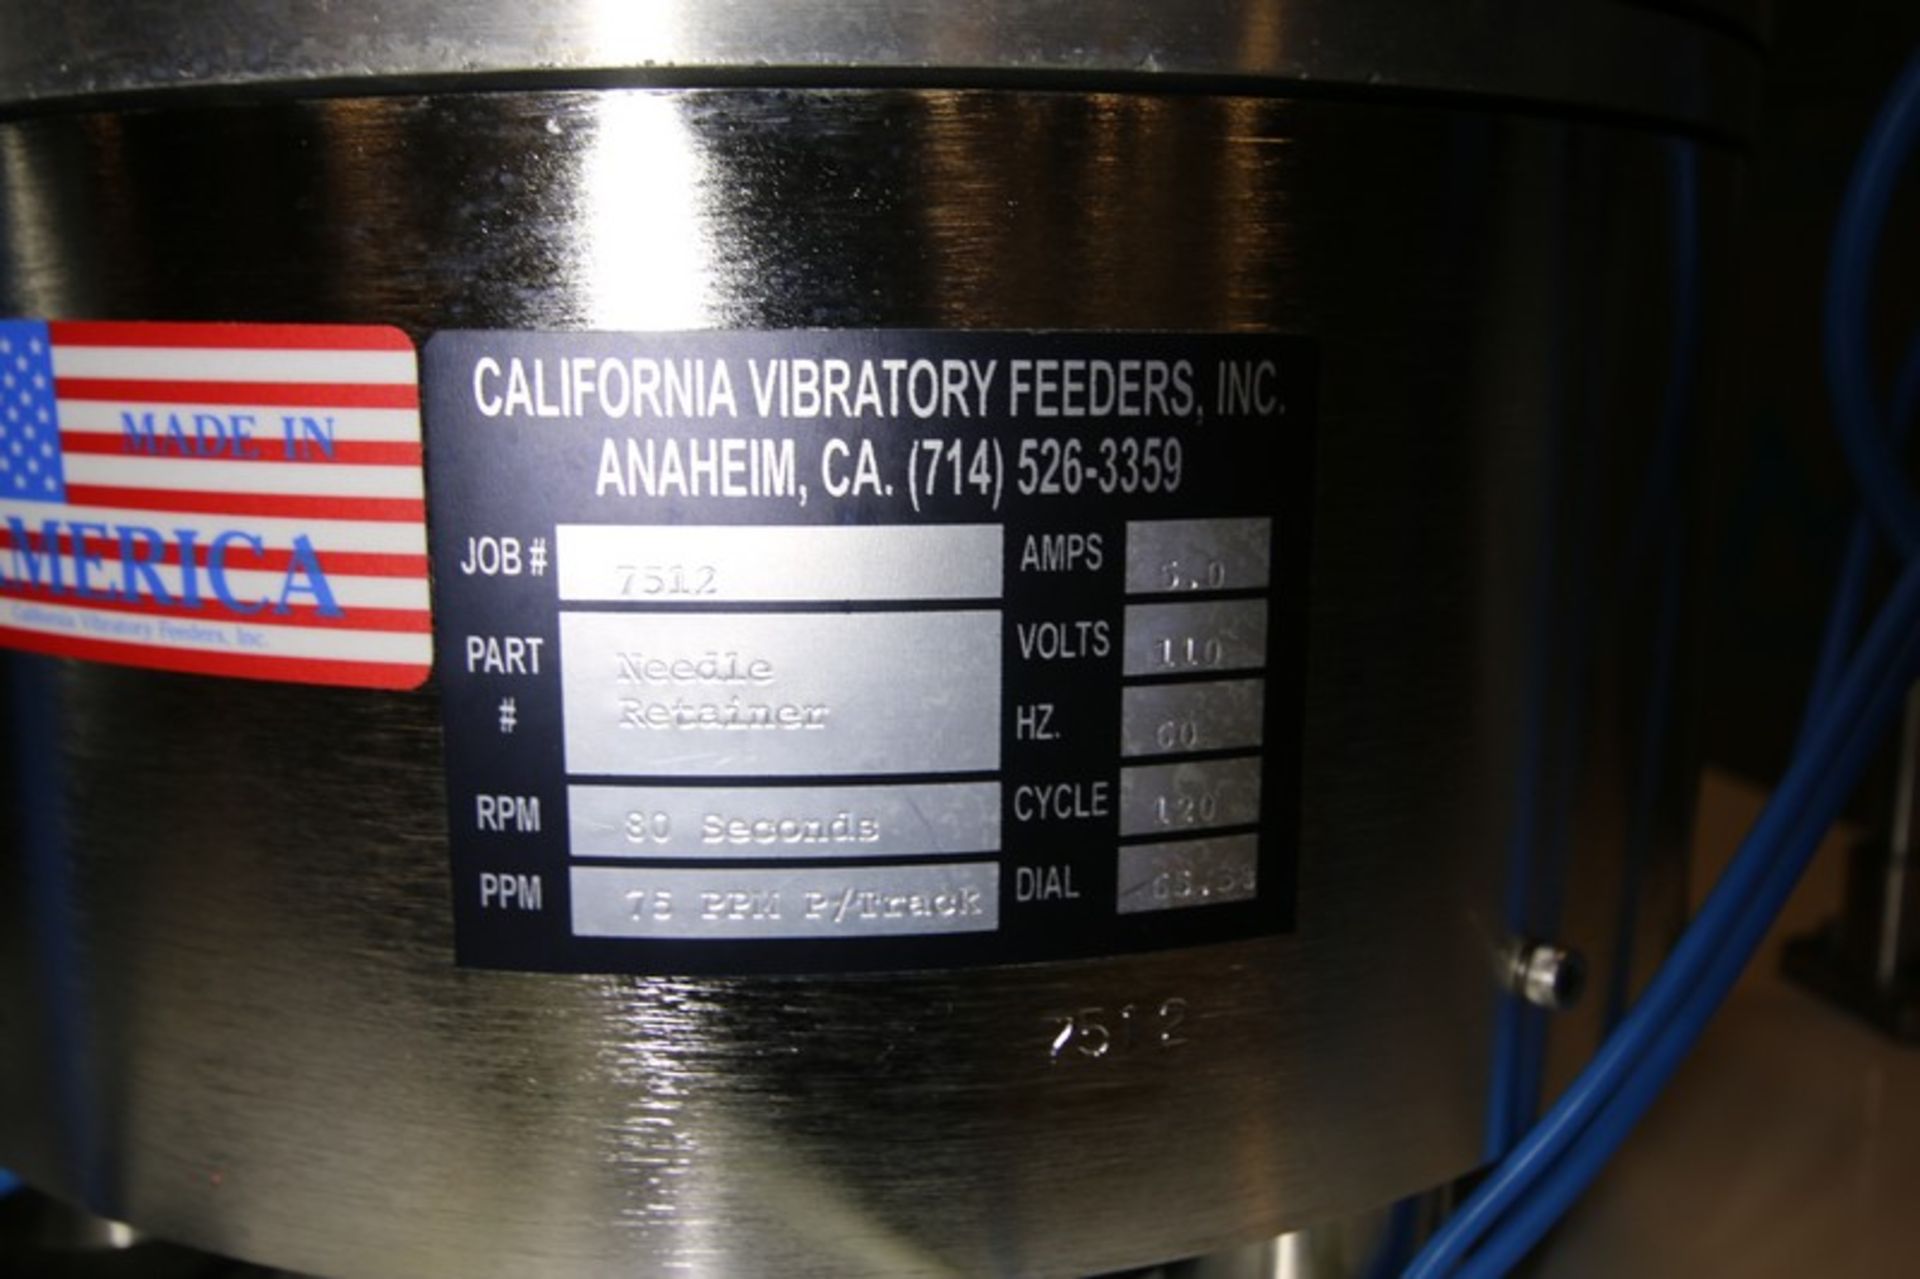 California 12" Vibratory S/S Cap Feeder, Model IN060, PN Needle Retainer, Job #7512, 110V, with - Image 11 of 12